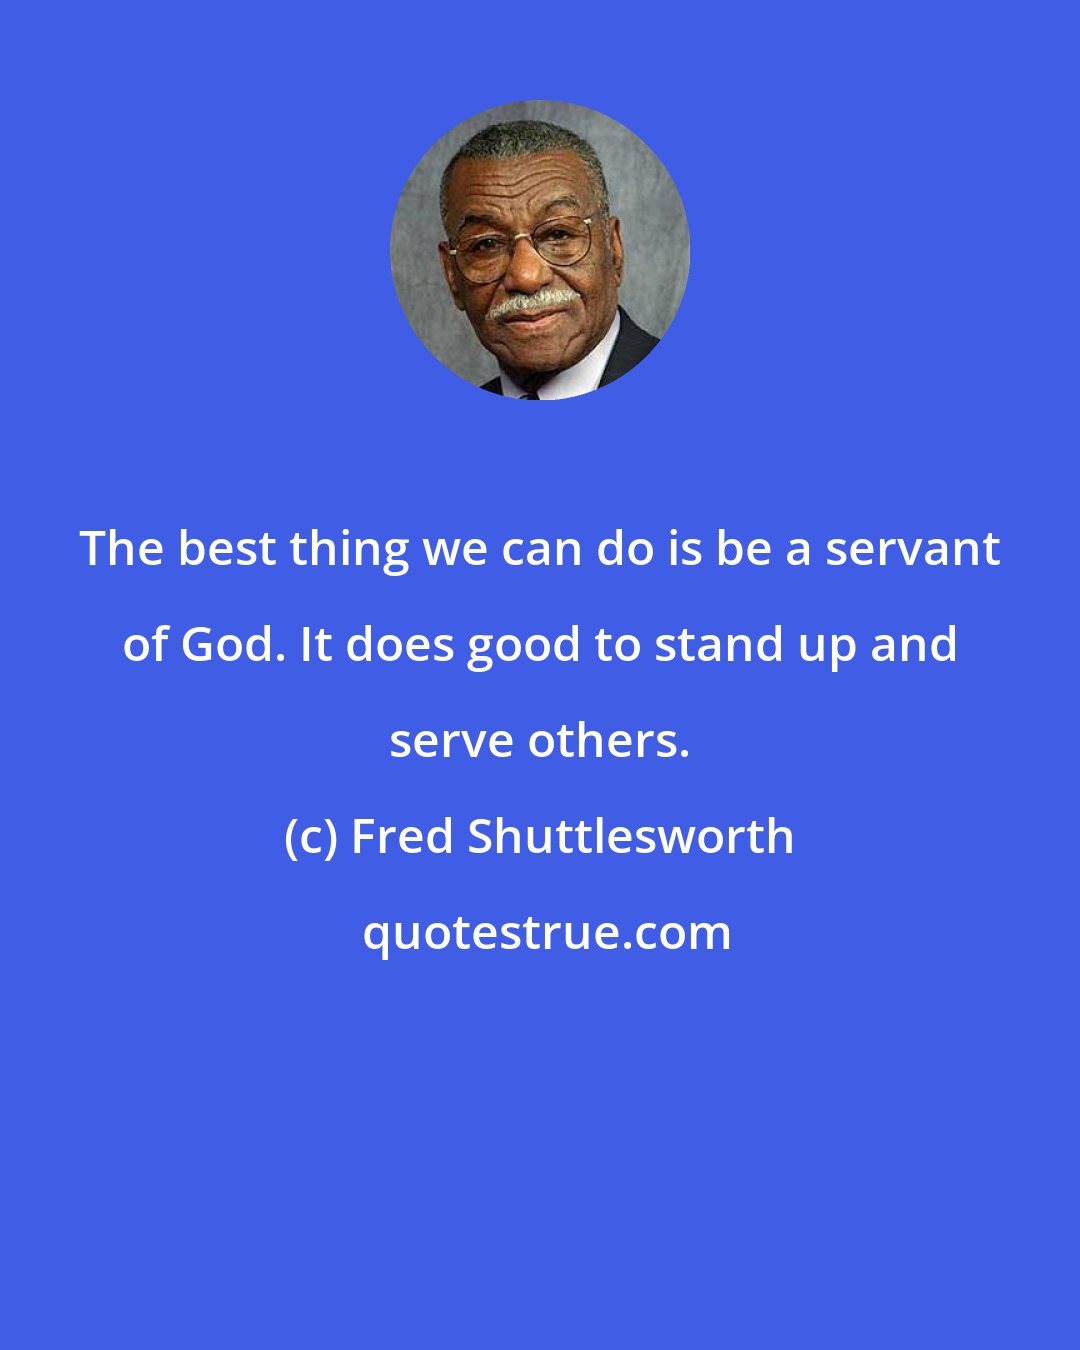 Fred Shuttlesworth: The best thing we can do is be a servant of God. It does good to stand up and serve others.